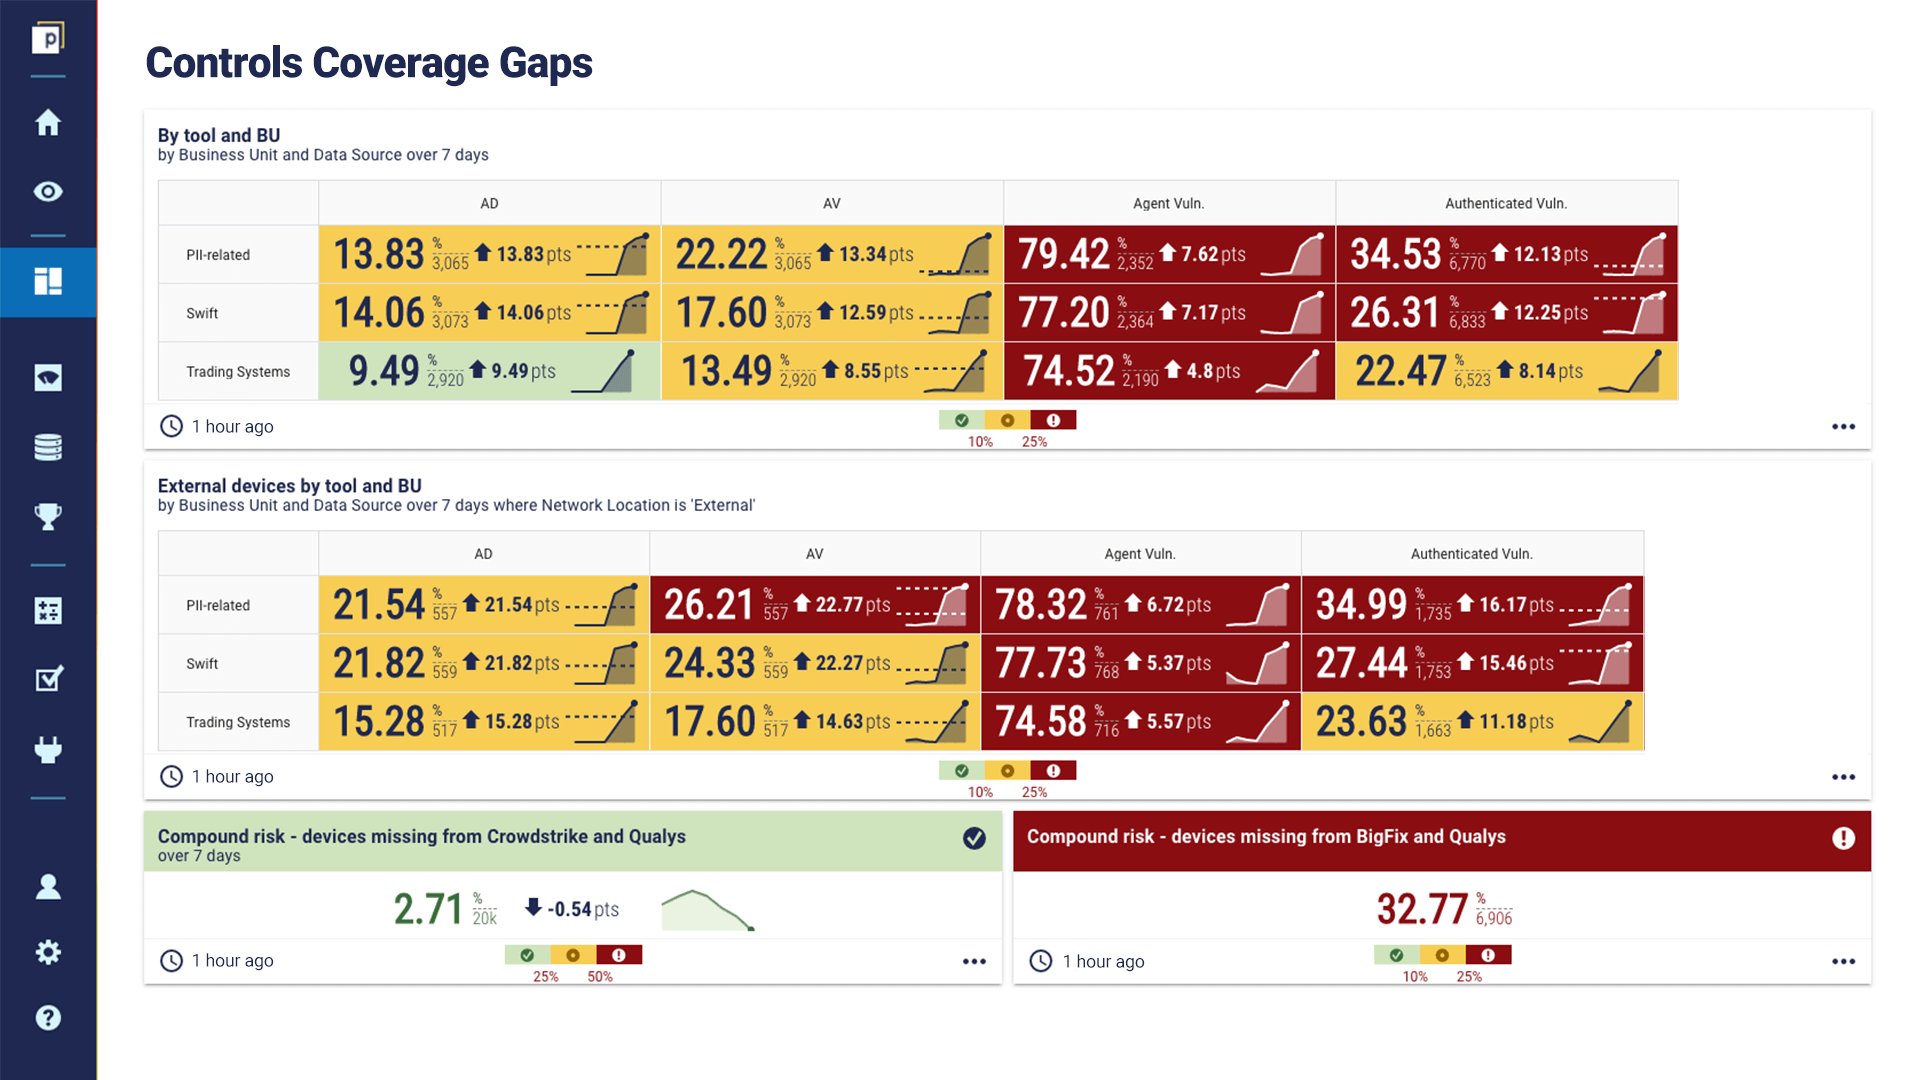 Dashboard showing contextualised data for control coverage gaps